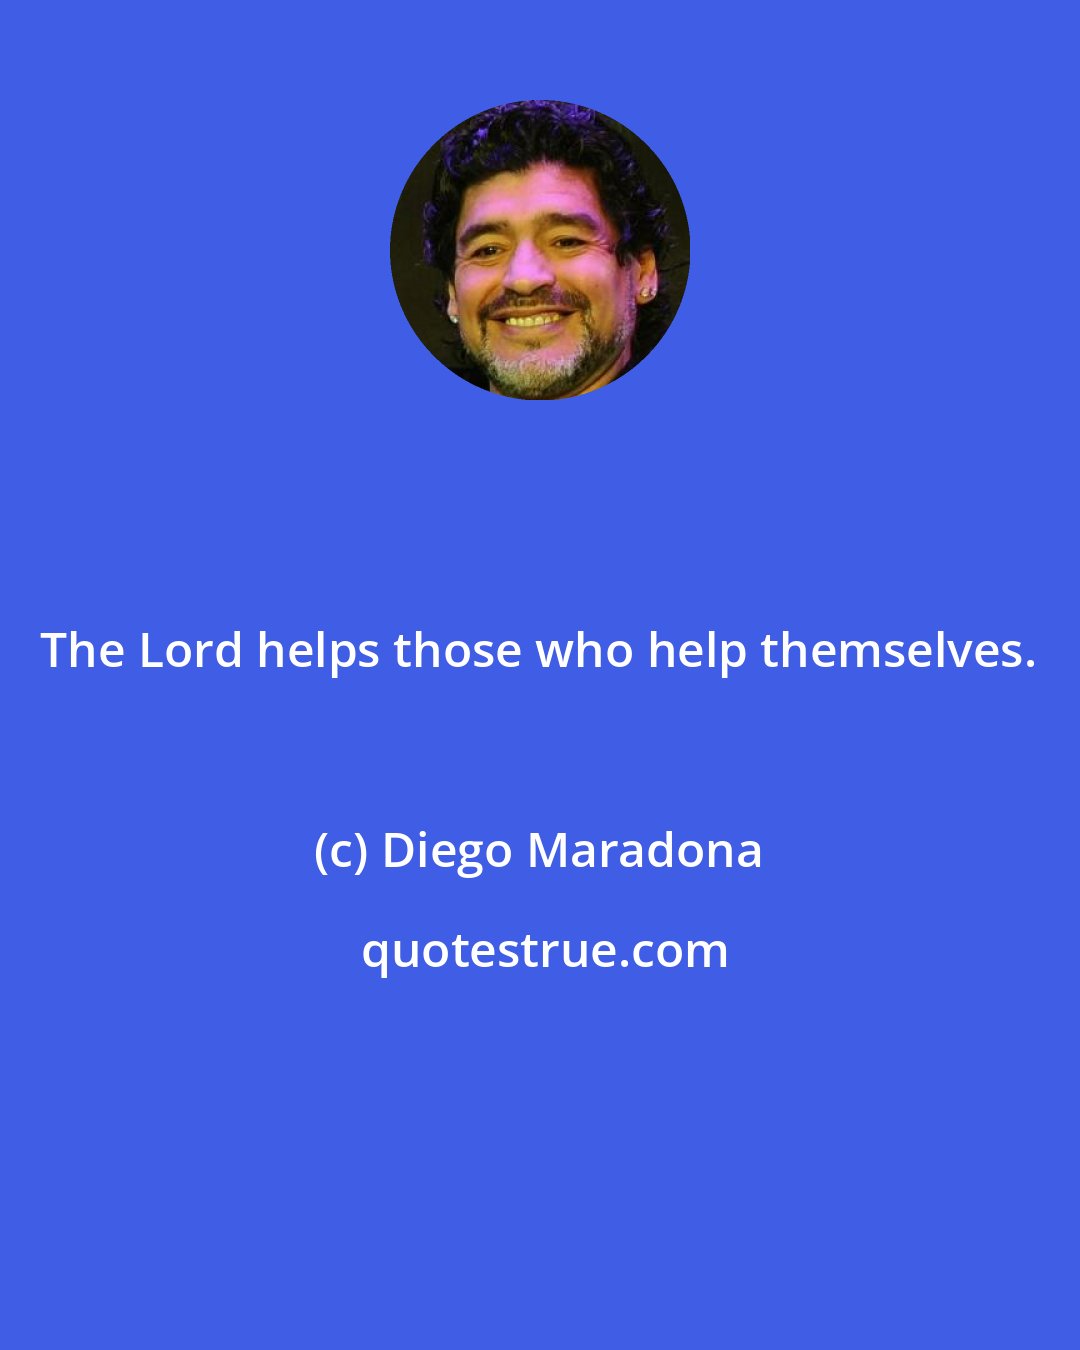 Diego Maradona: The Lord helps those who help themselves.